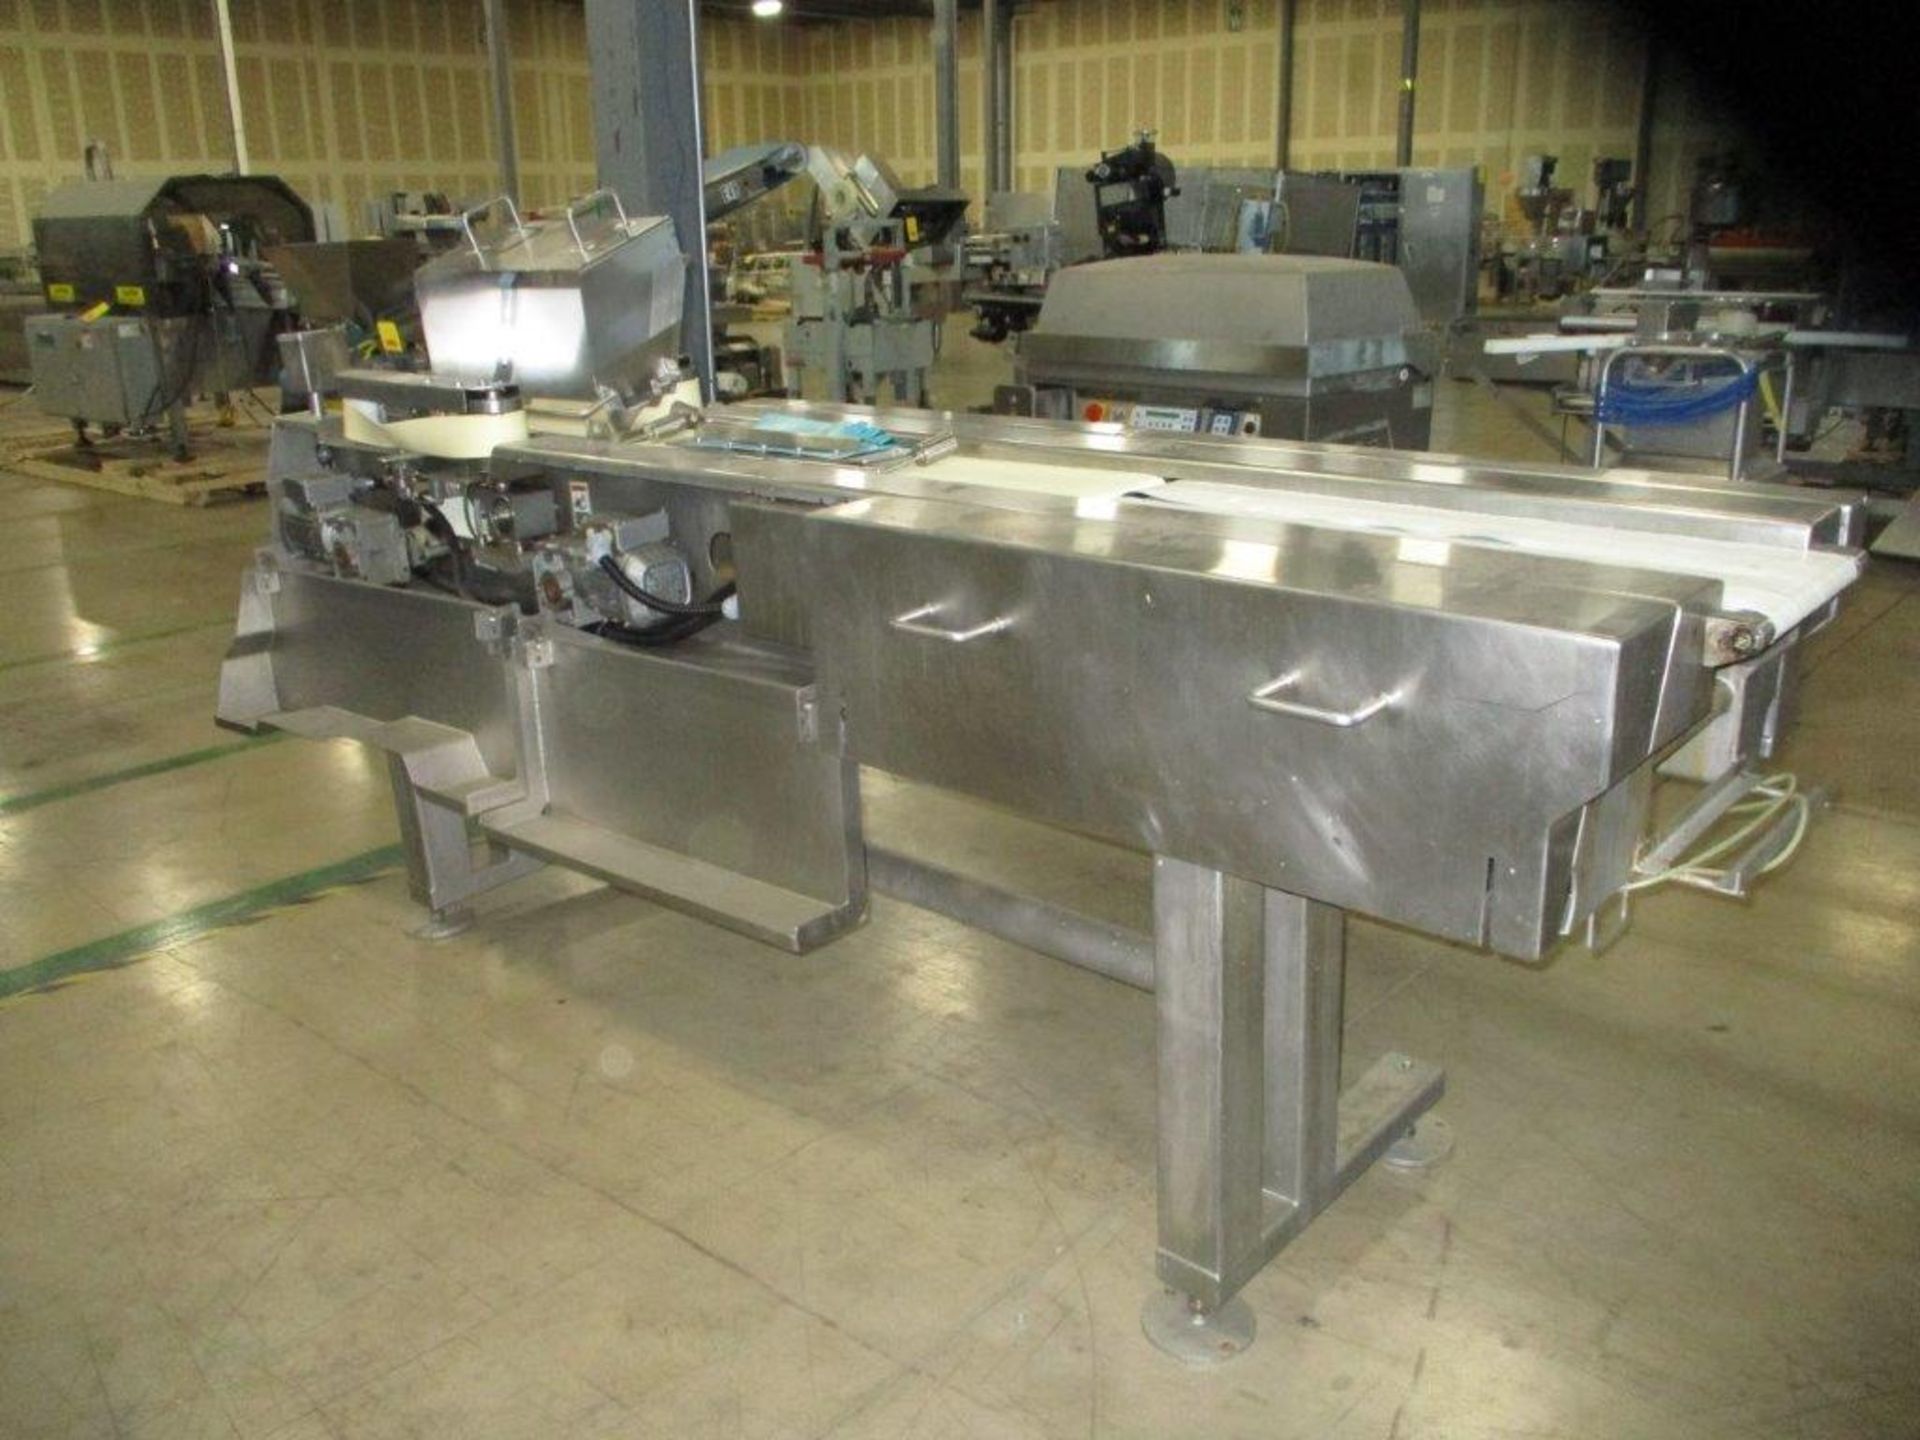 S/S Transfer Conveyor with Side Belts 11" Width x 10'6" Length - Riggers Fee: $350